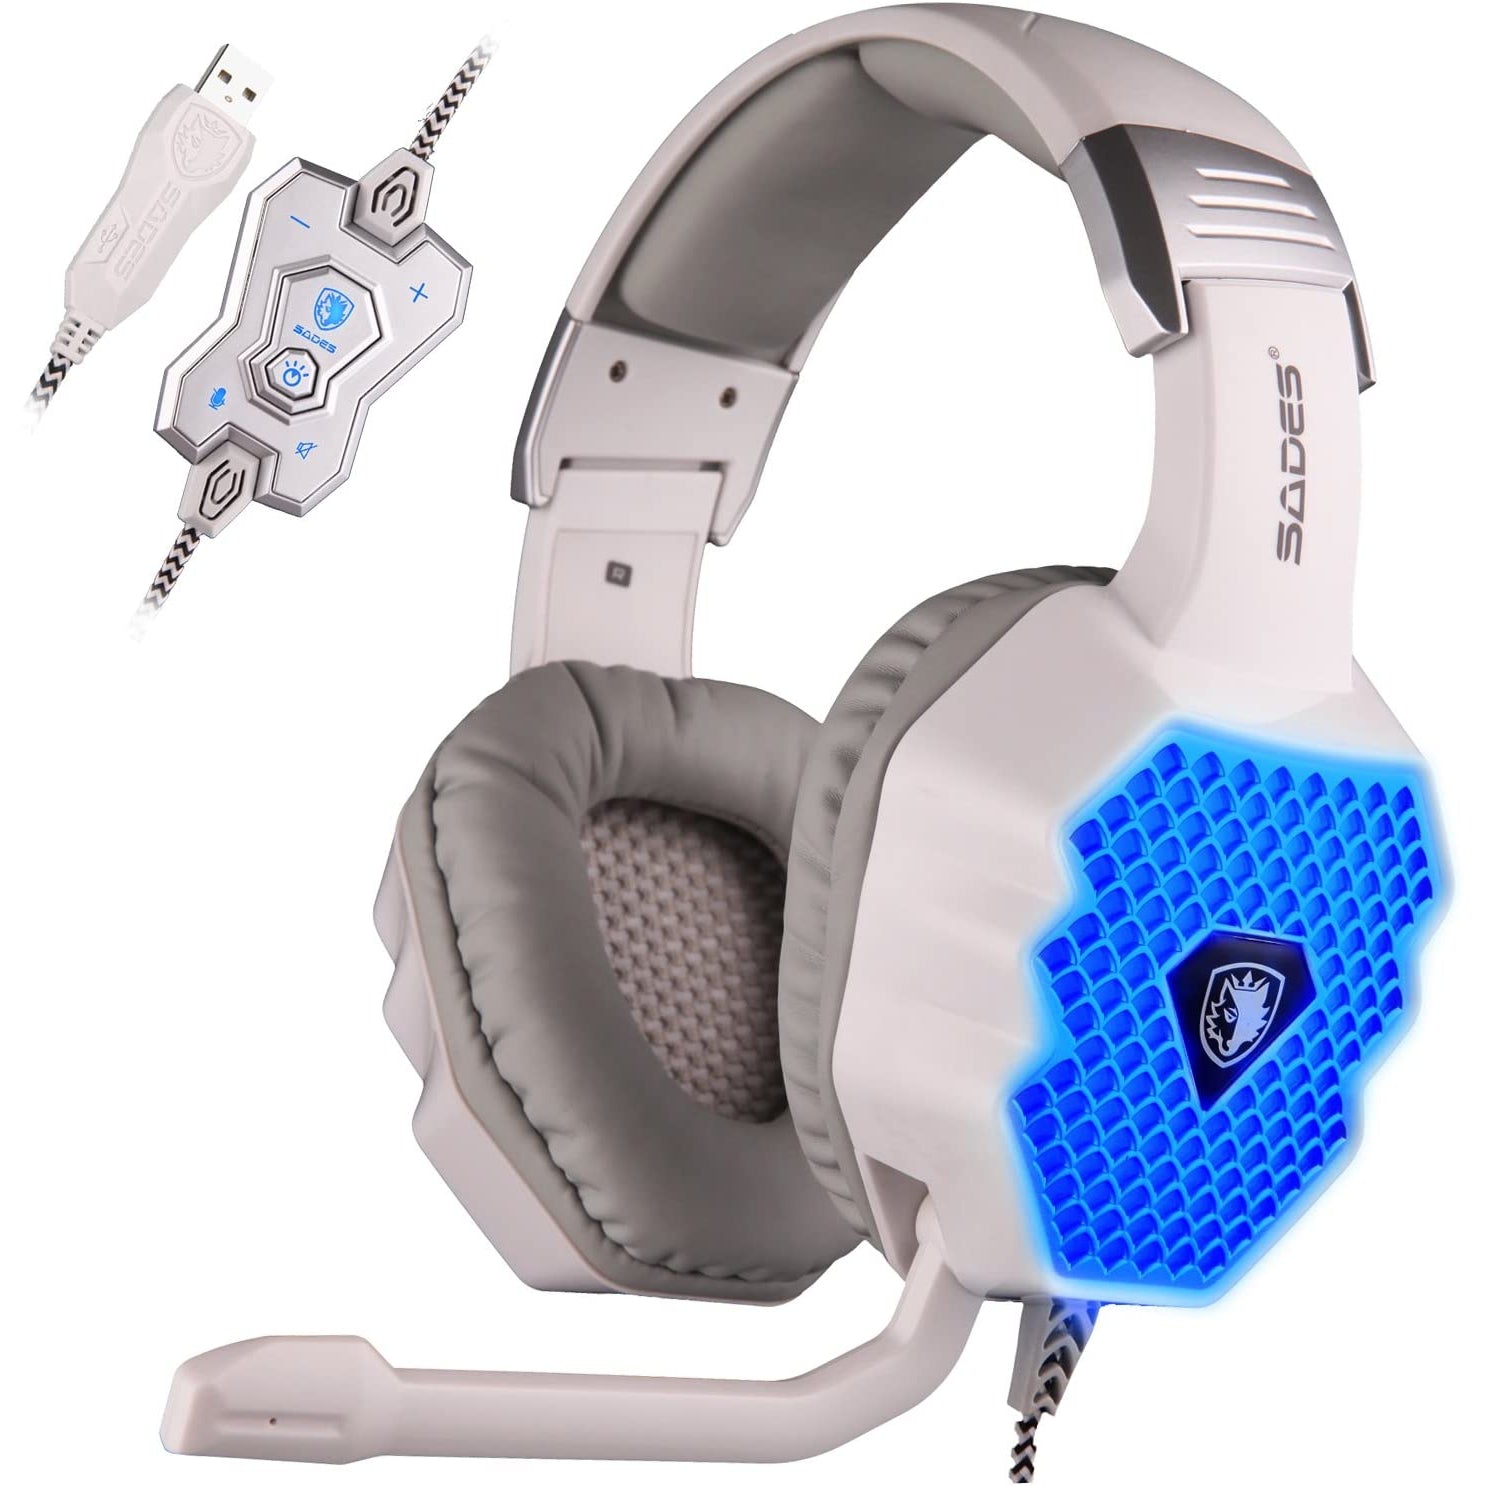 SADES A70 7.1 Surround Sound Stereo PC Gaming Headset